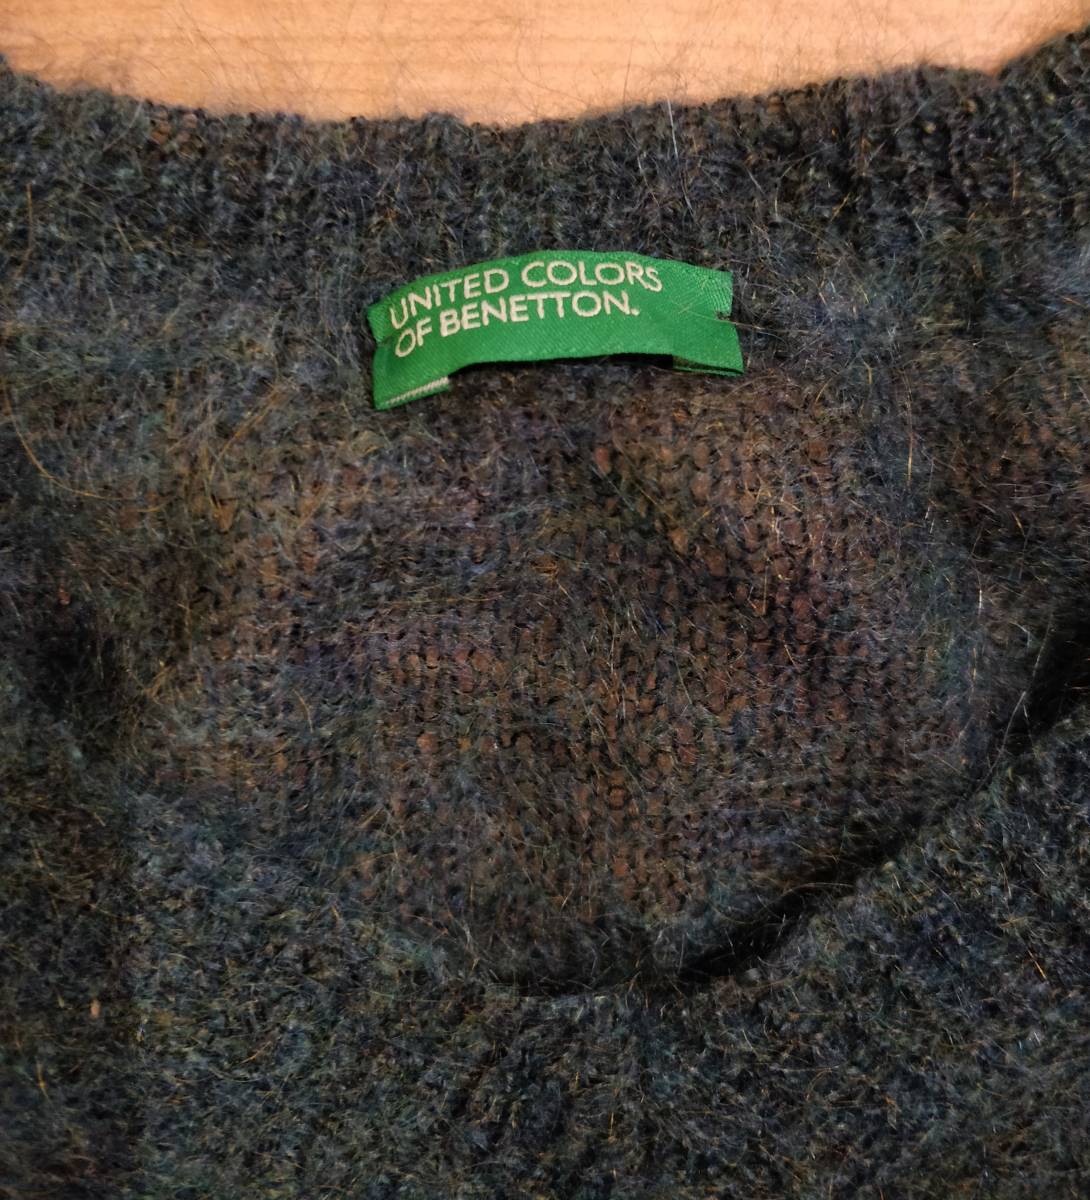 United Colors of Benetton Benetton knitted lady's sweater mo hair 